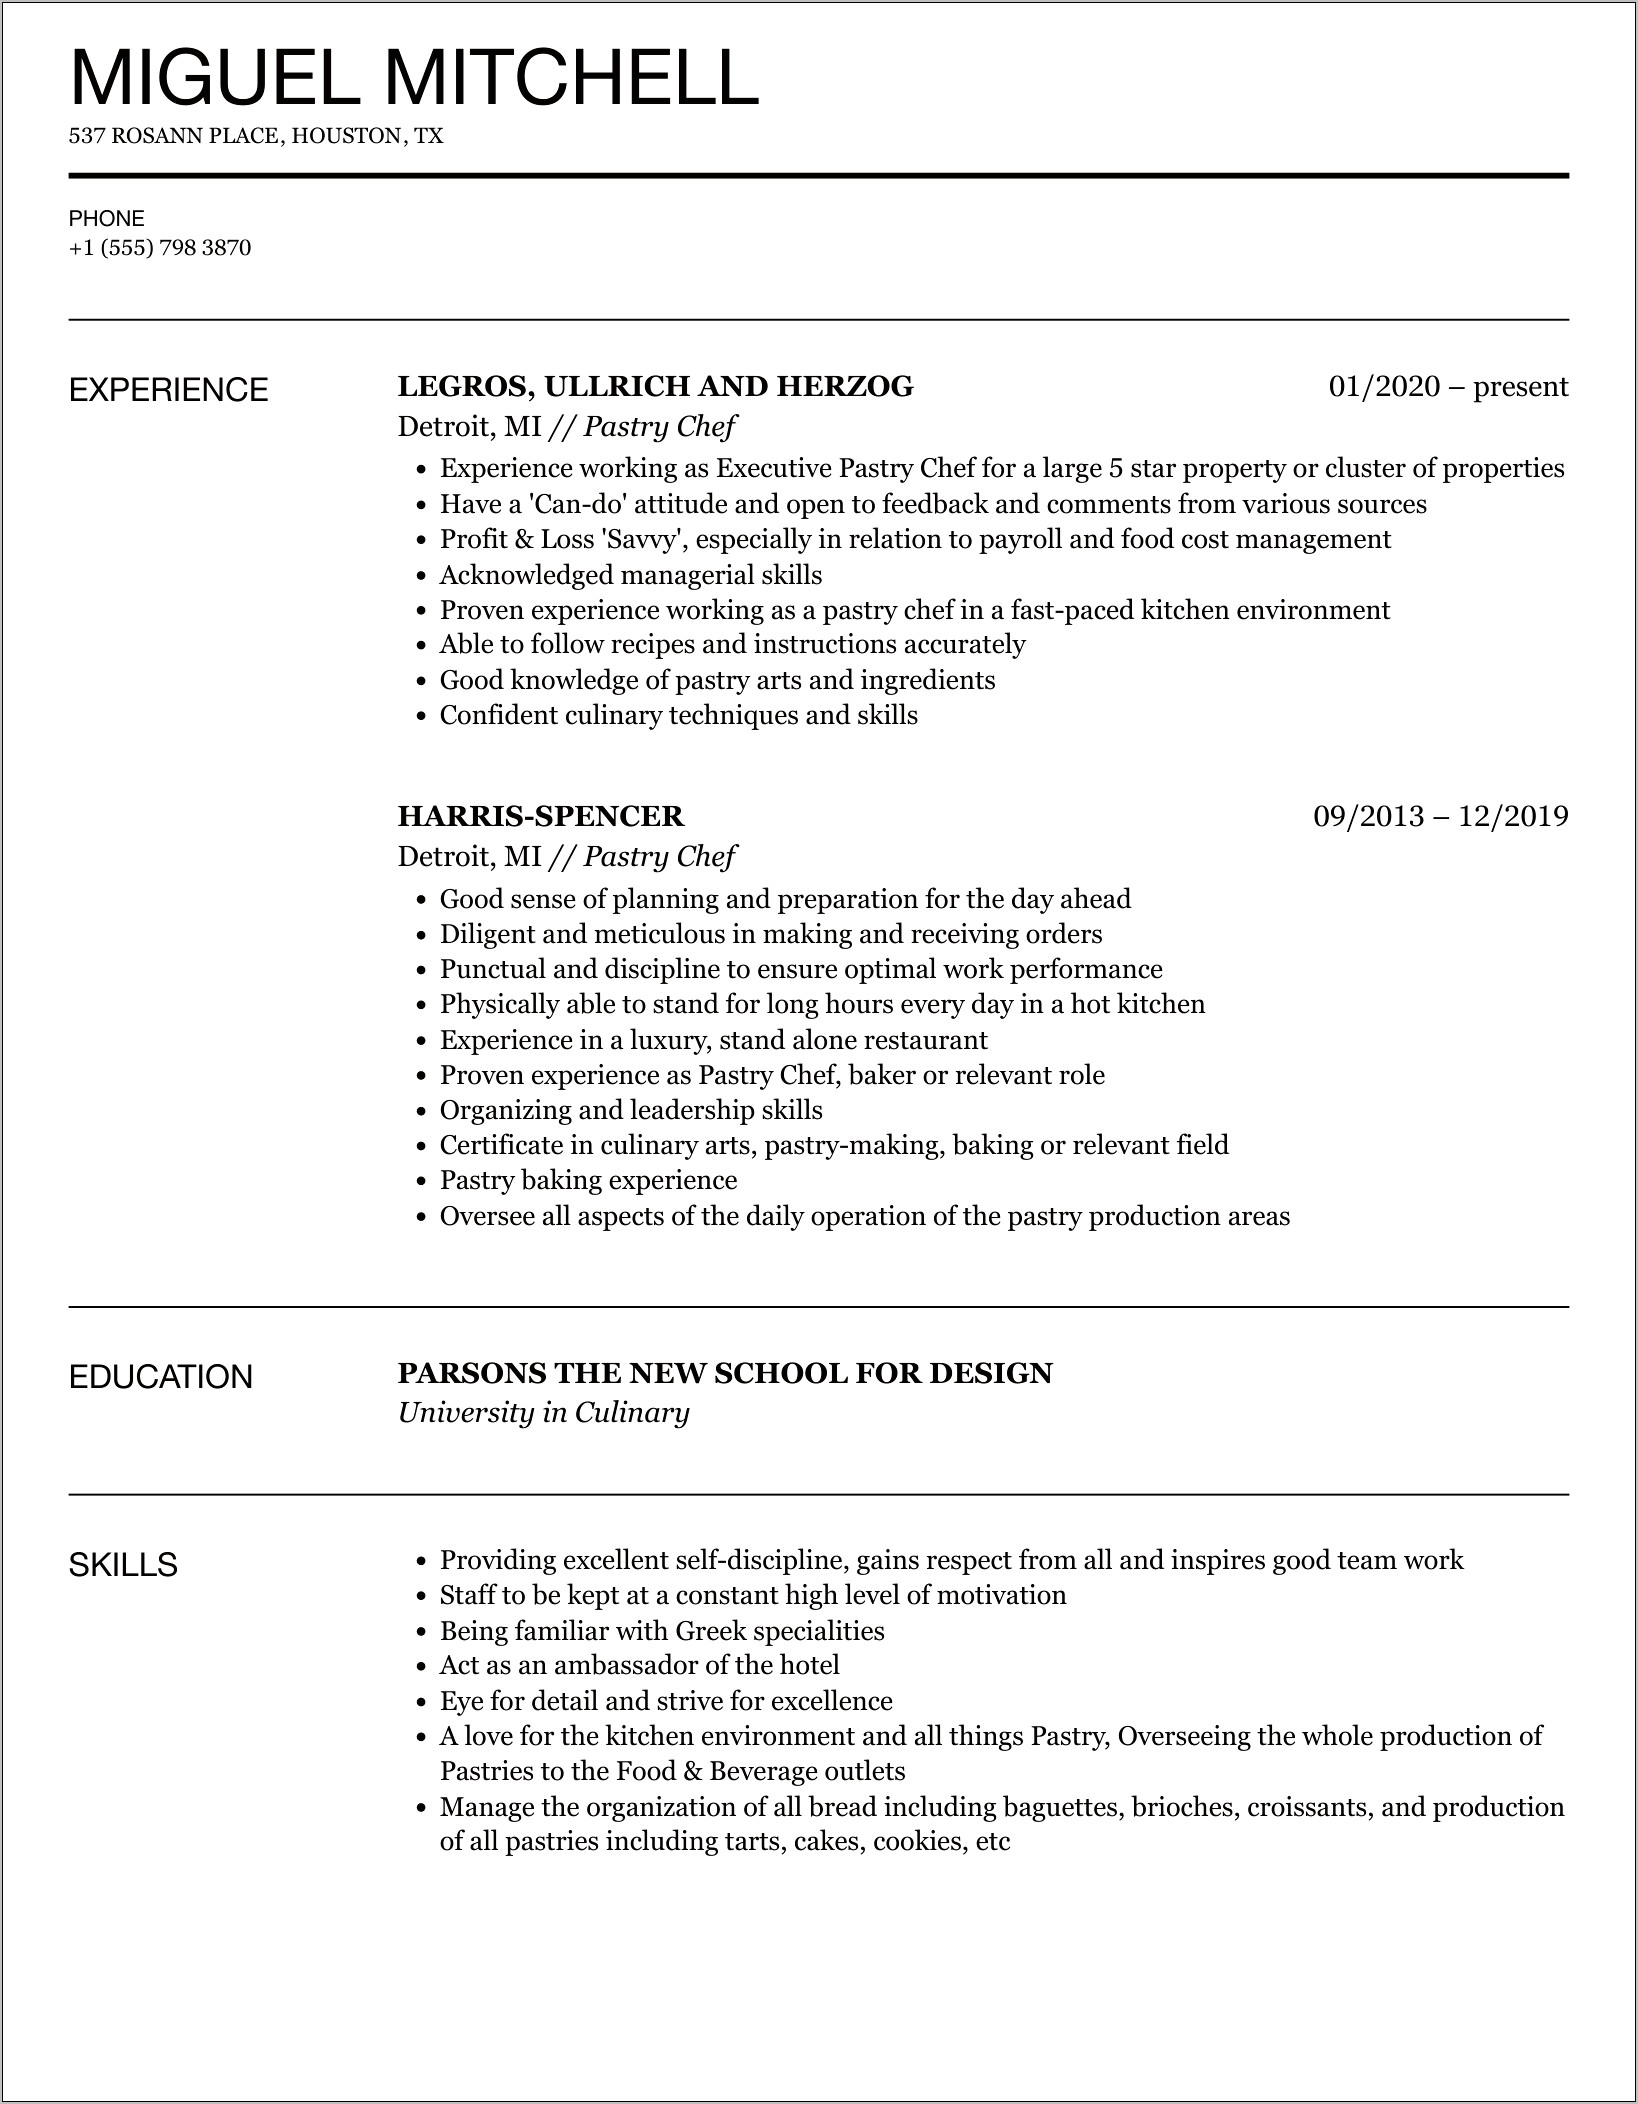 Resume Objectives For Pastry Chef